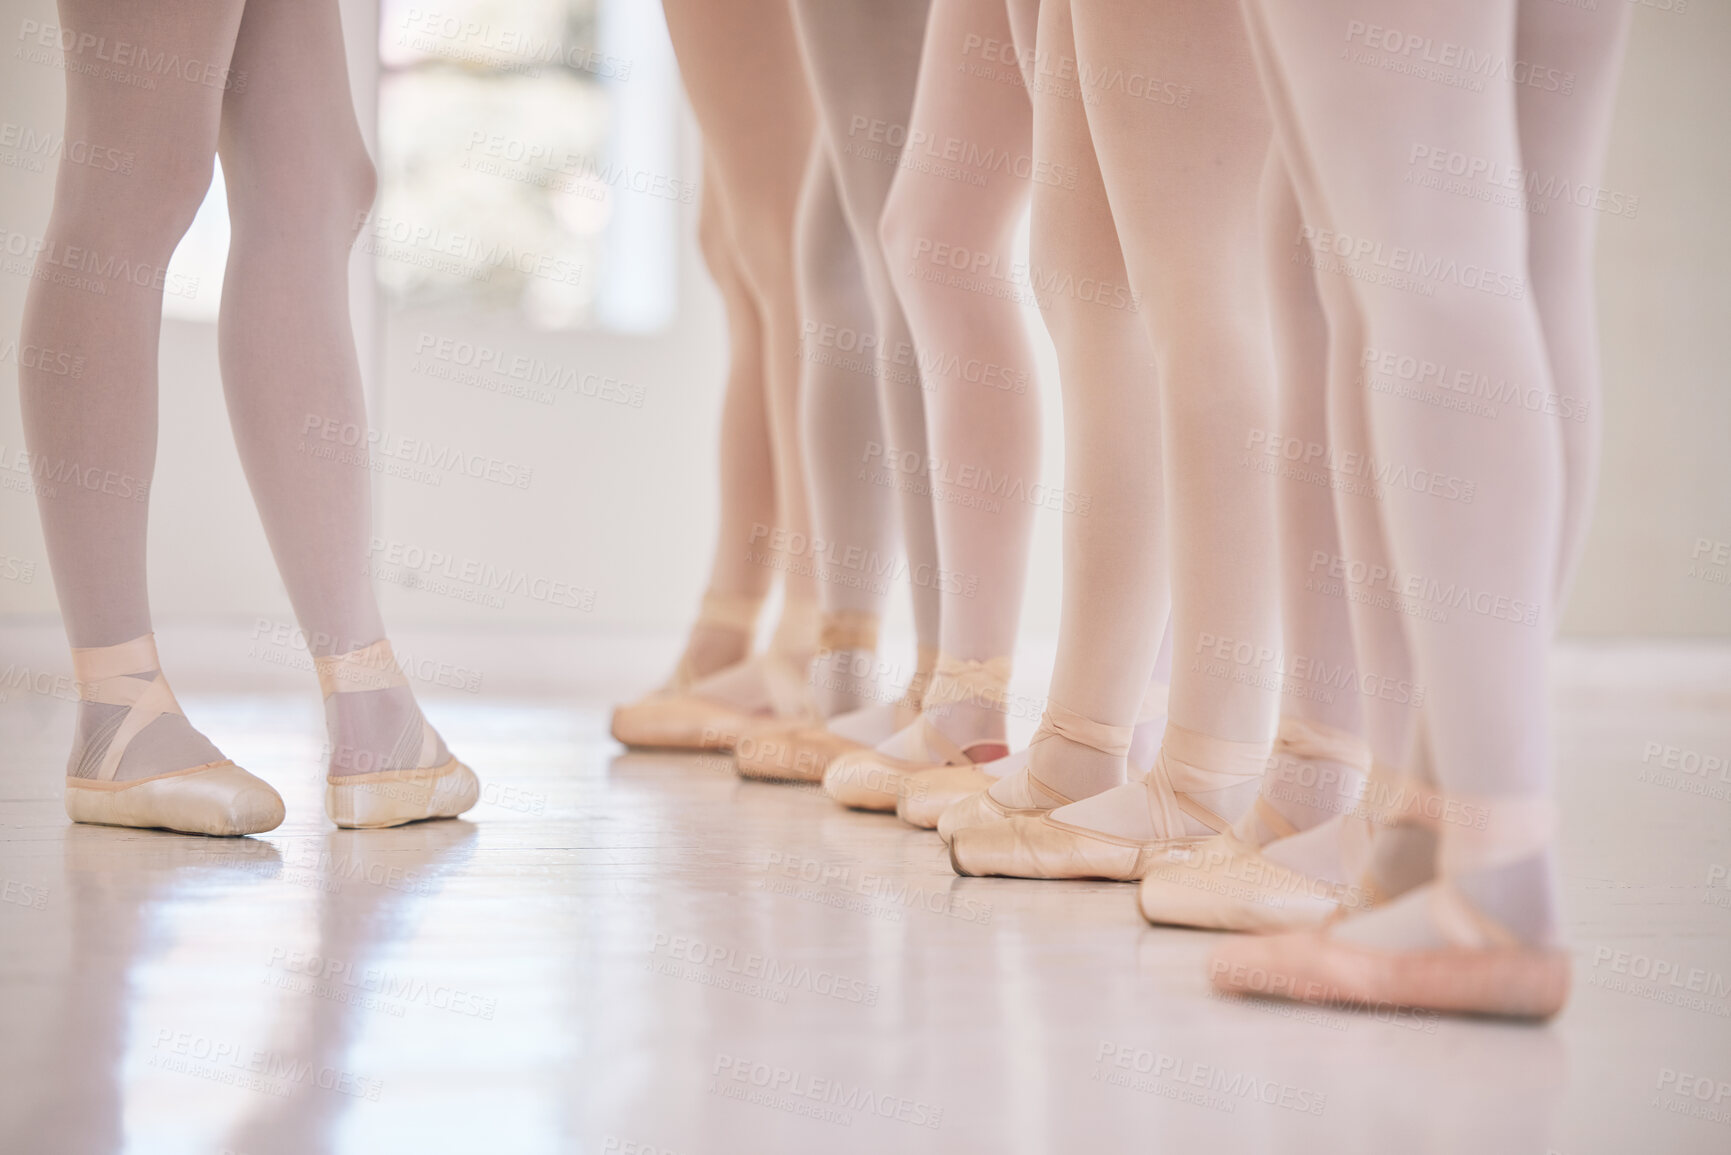 Buy stock photo Closeup woman dance instructor teaching a ballet class to a group of a children in her studio. Ballerina teacher working with girl students, preparing for their recital, performance or upcoming show